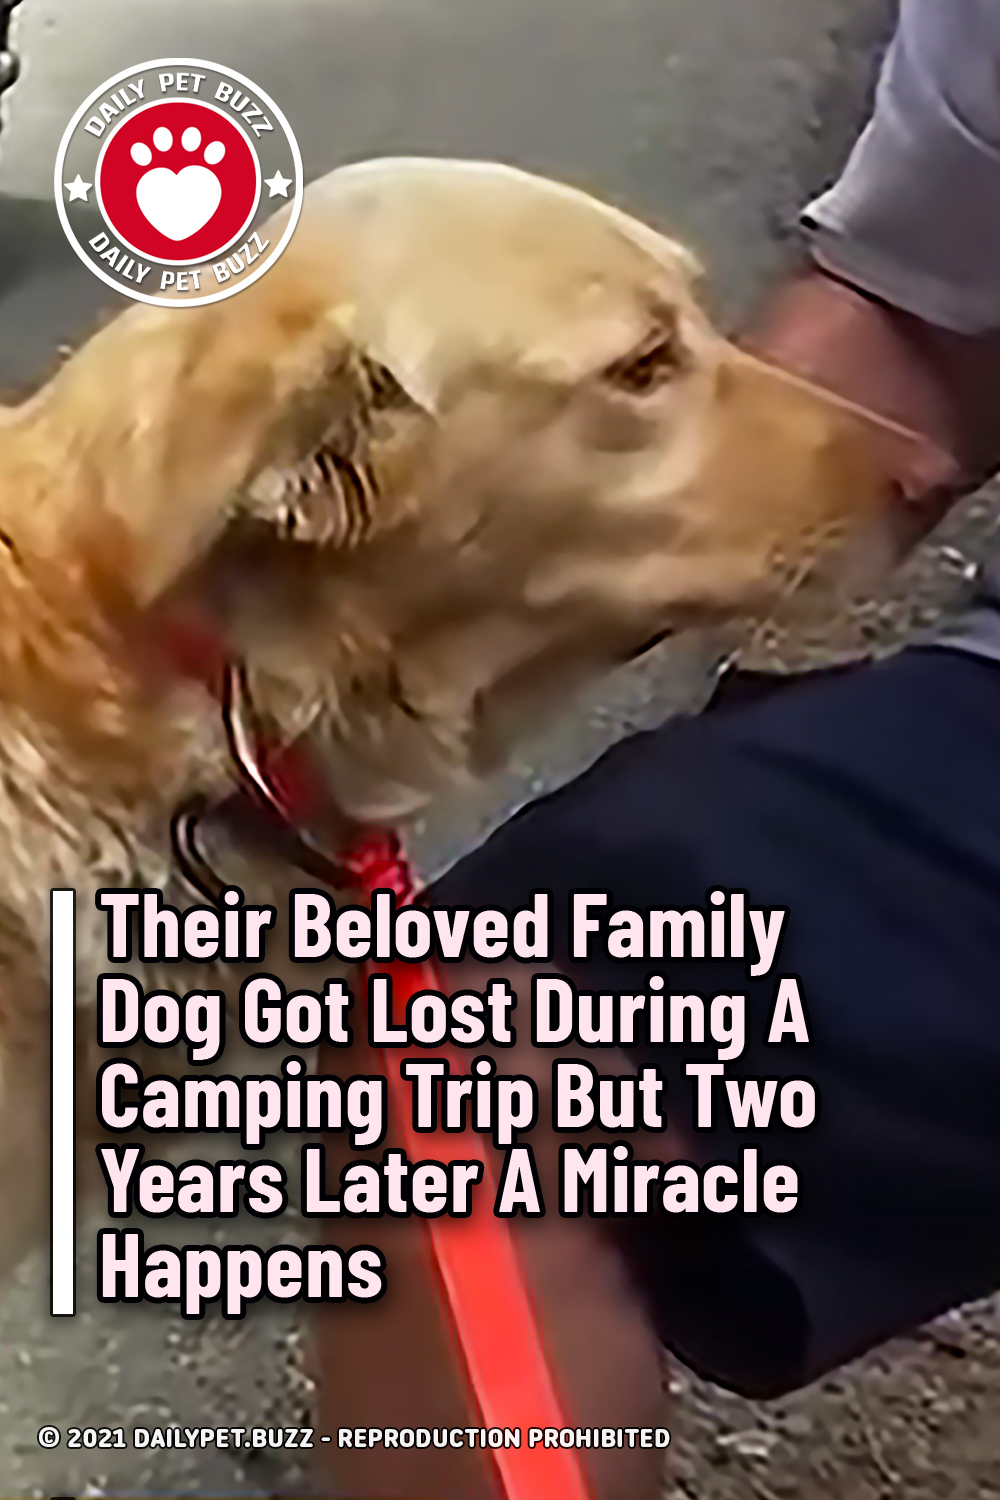 Their Beloved Family Dog Got Lost During A Camping Trip But Two Years Later A Miracle Happens